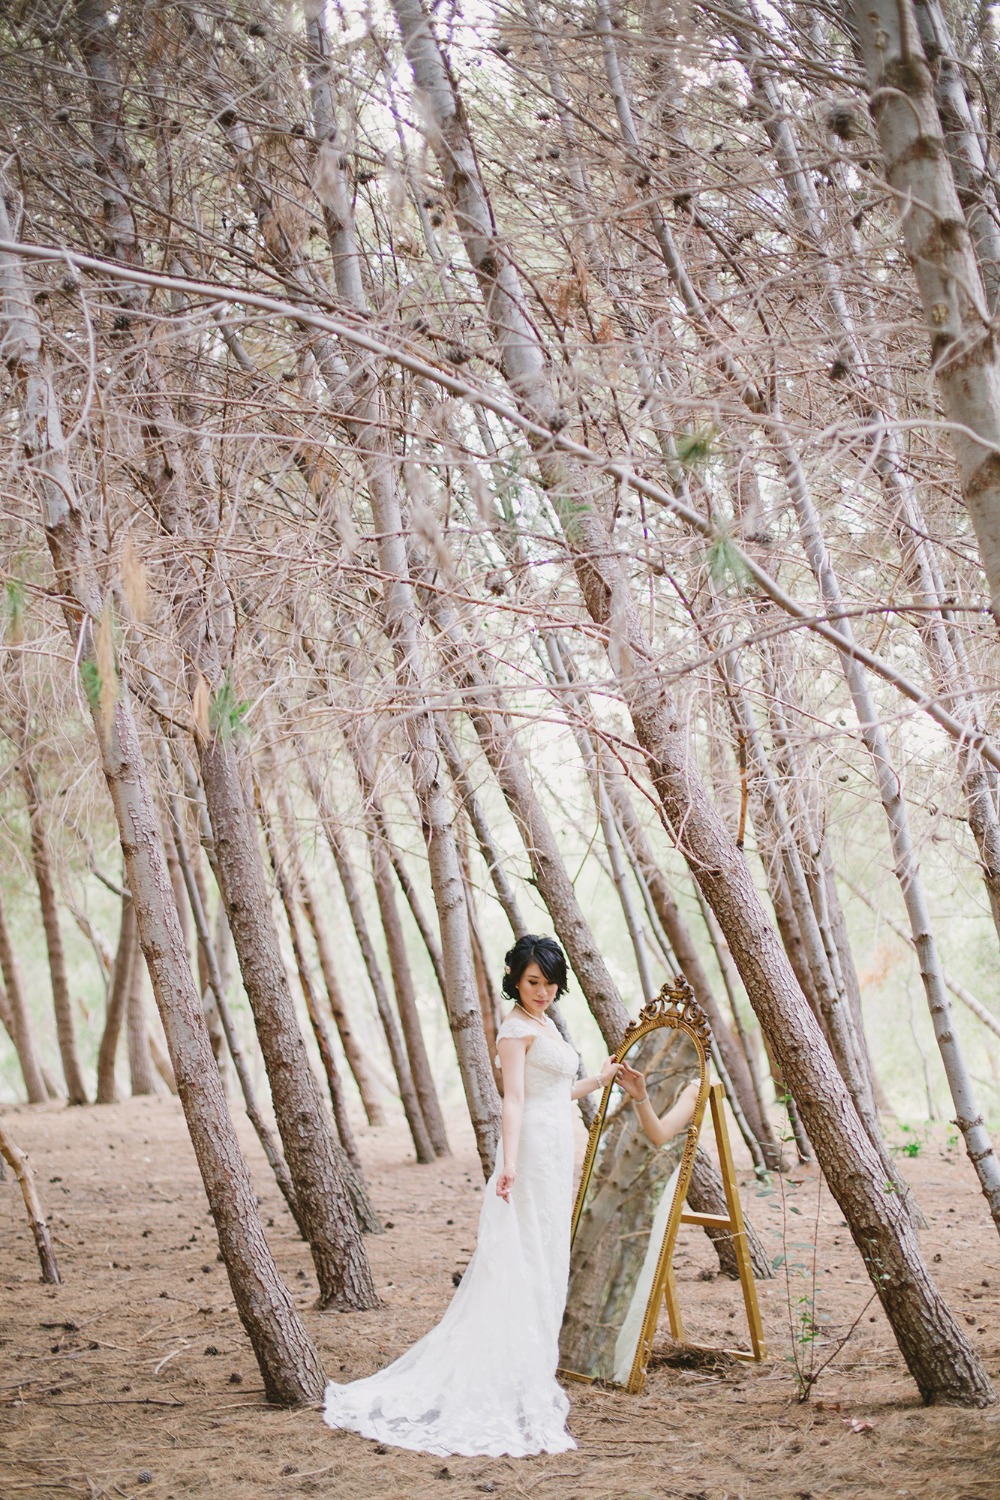 wedding-submission-from-monica-chiu